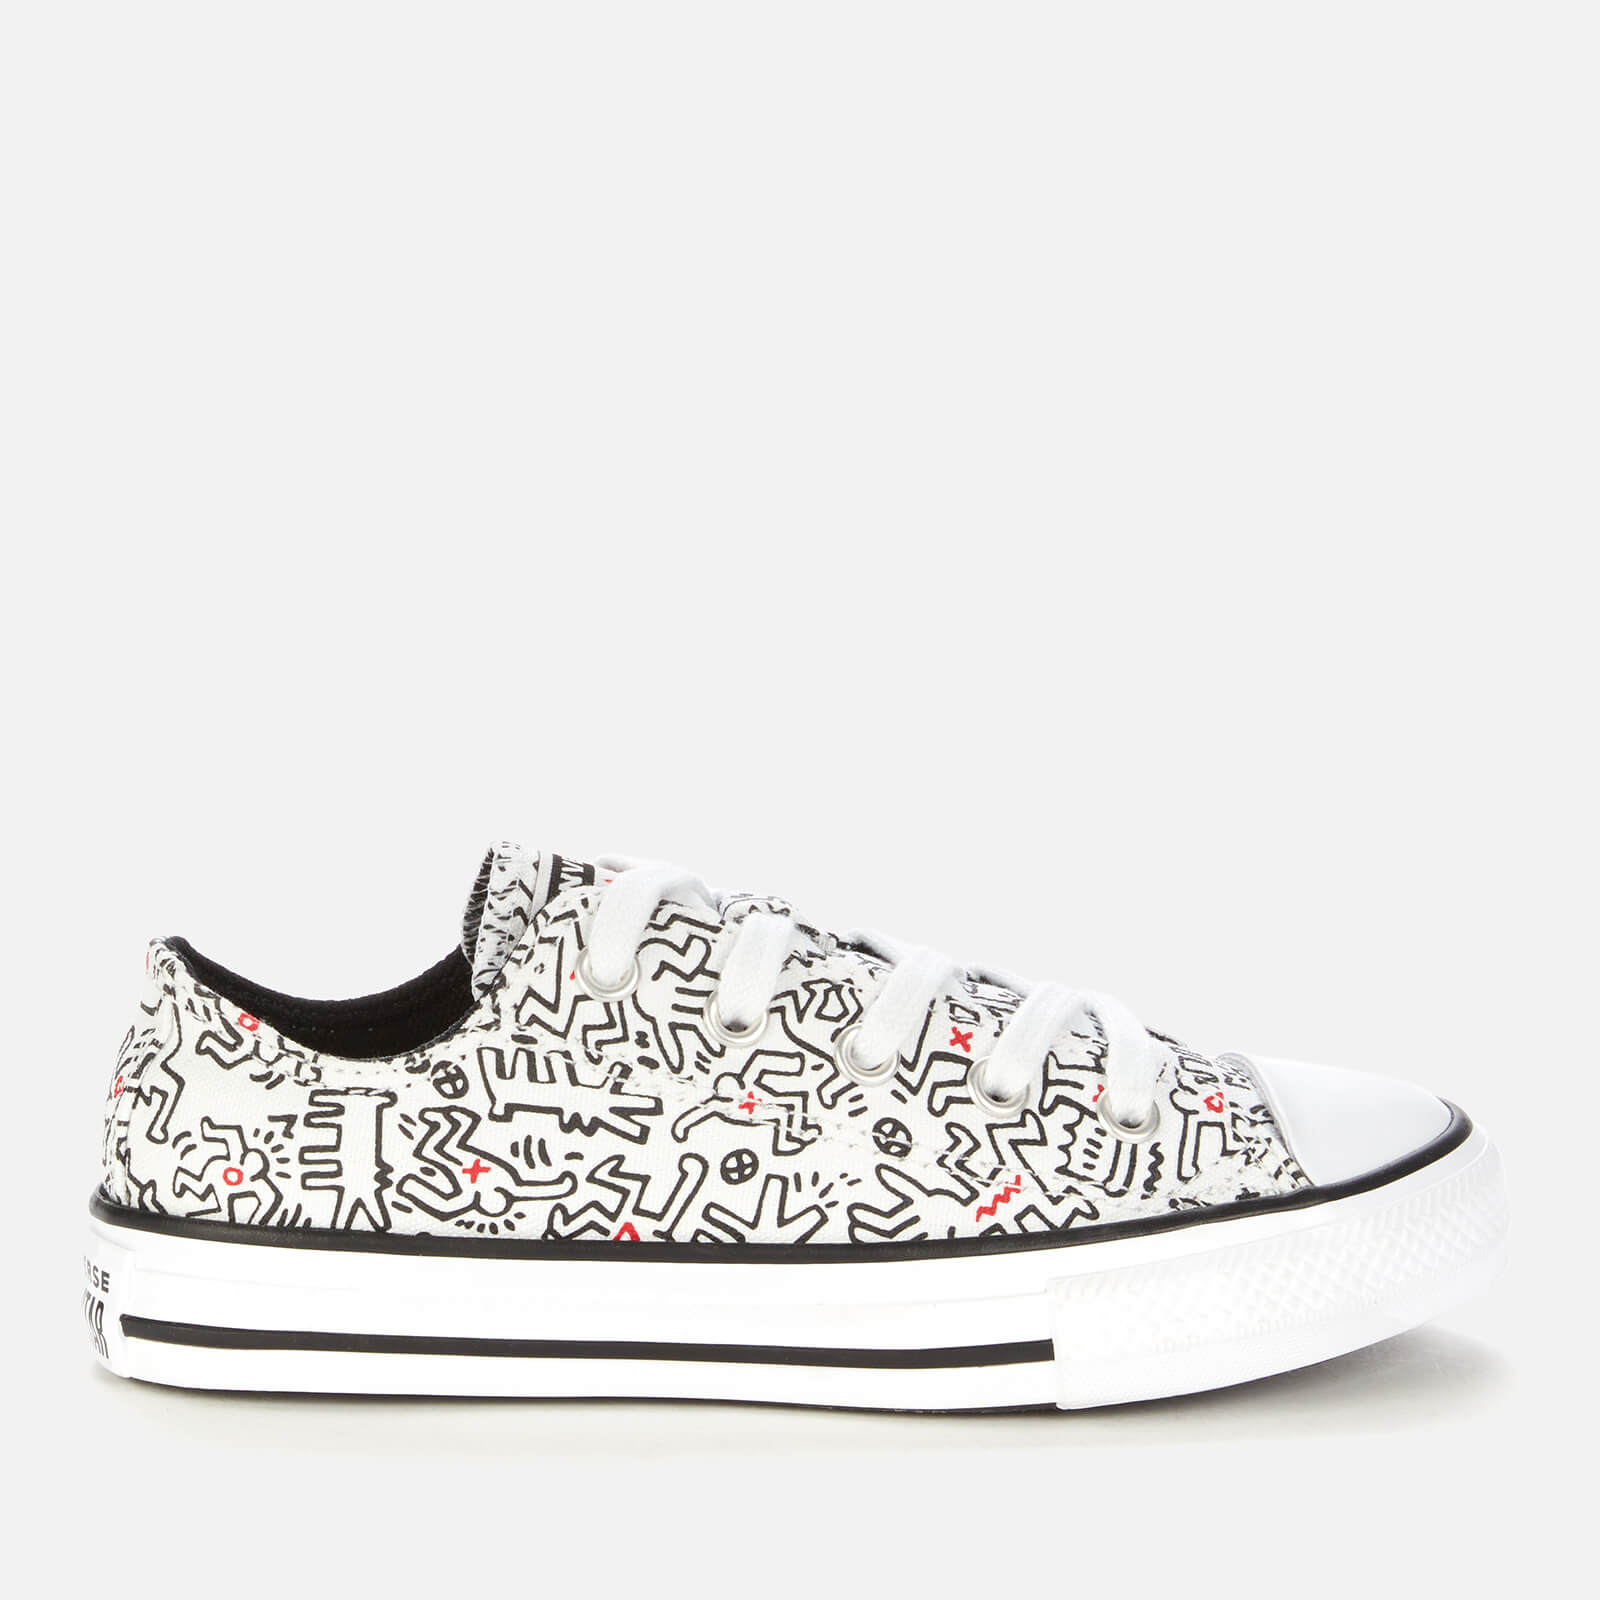 Converse Kids' Keith Haring Chuck Taylor All Star Ox Trainers - White/Black/Red - UK 10 Kids